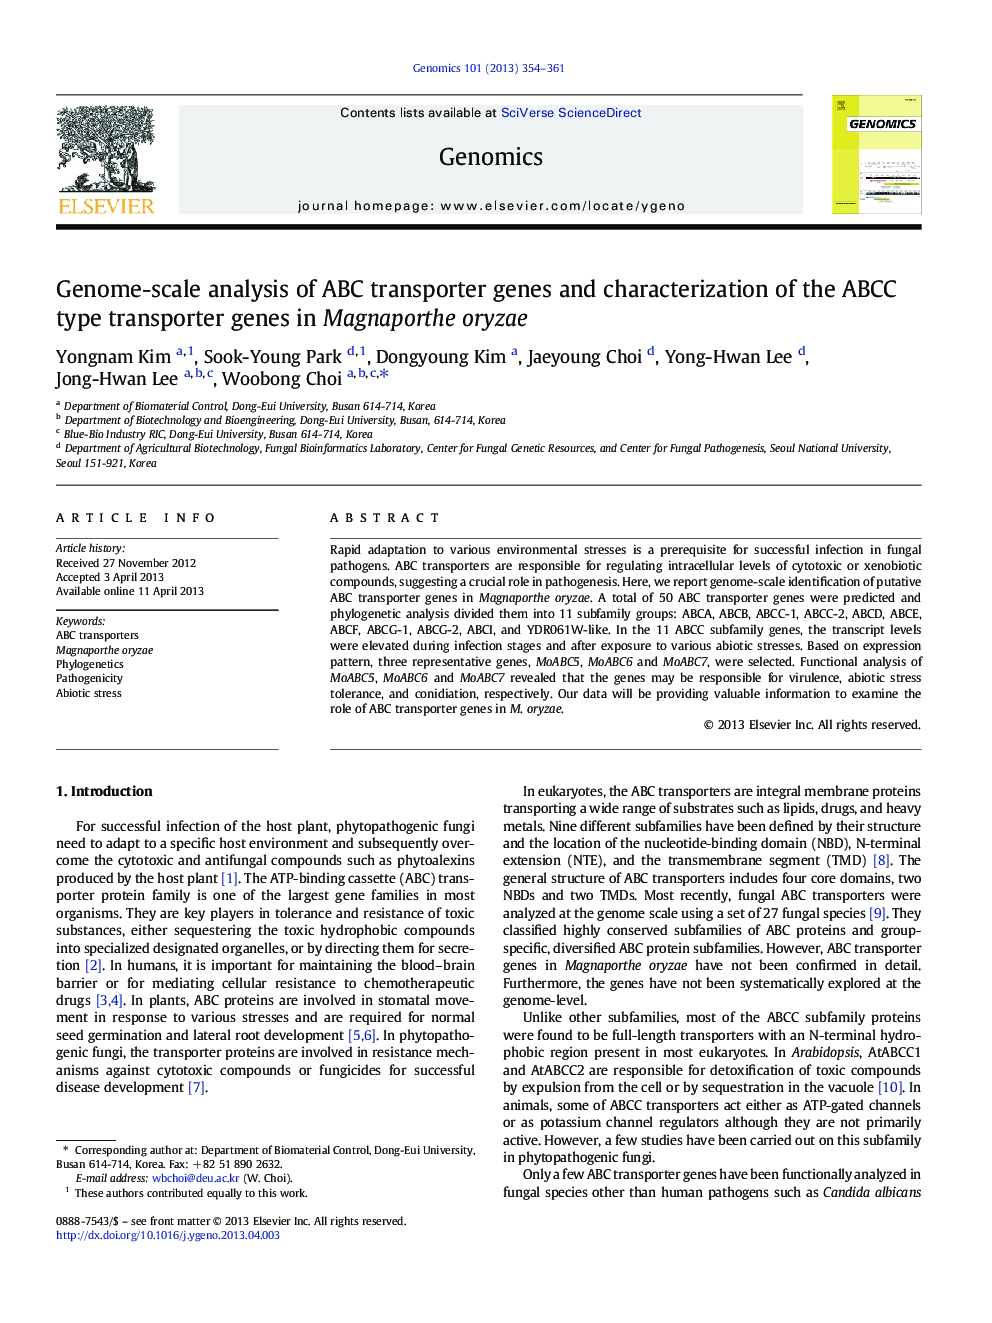 Genome-scale analysis of ABC transporter genes and characterization of the ABCC type transporter genes in Magnaporthe oryzae